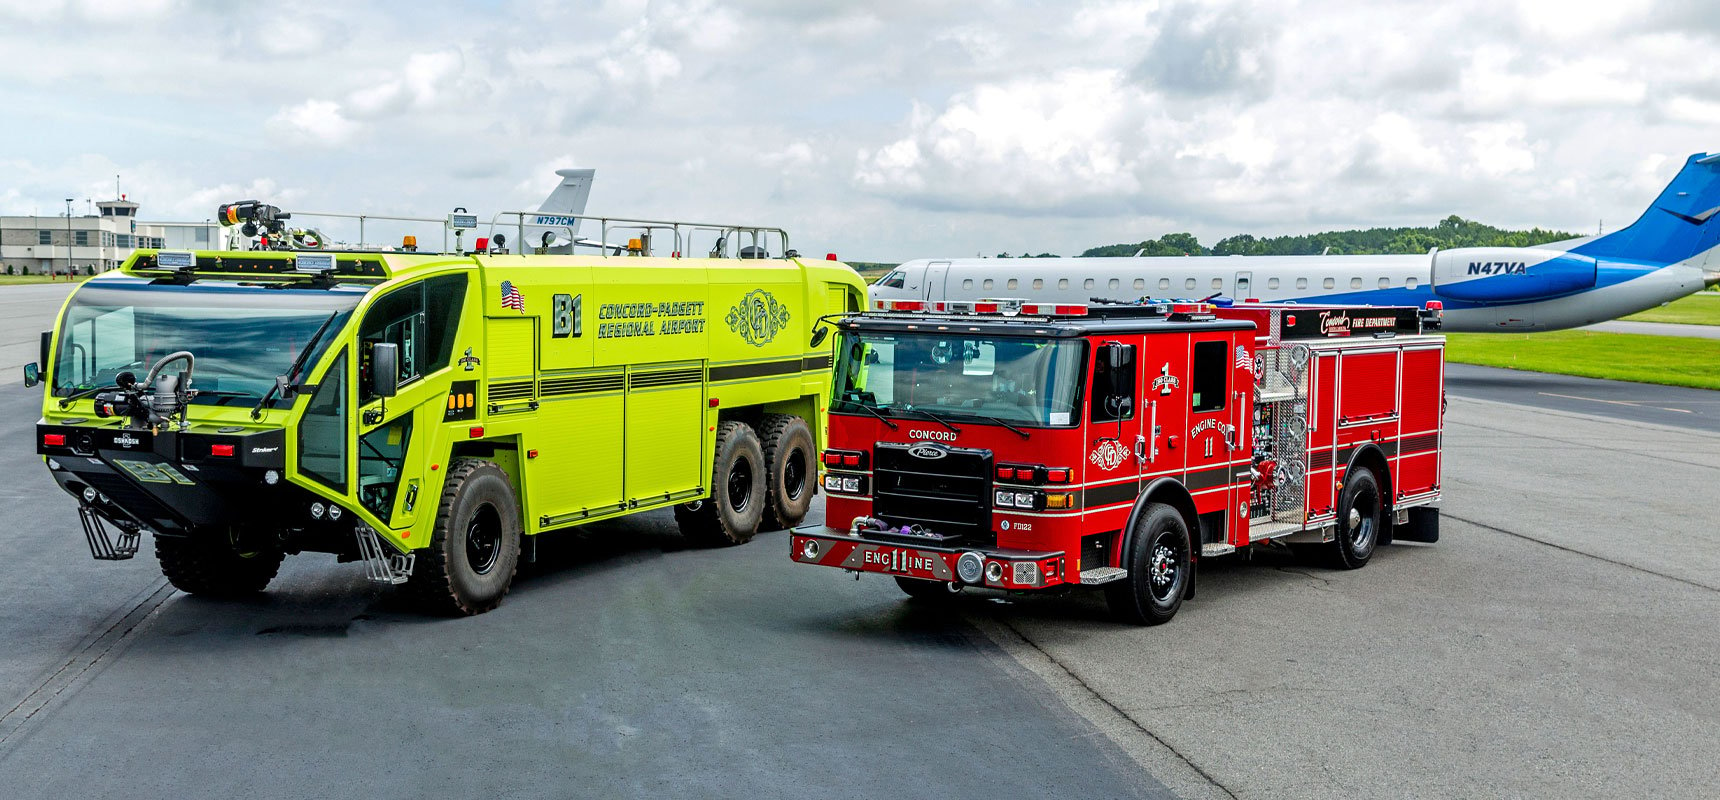 A yellow airport fire truck sits next to a red municipal fire truck on an airport tarmac with a white and blue plane in the background. 